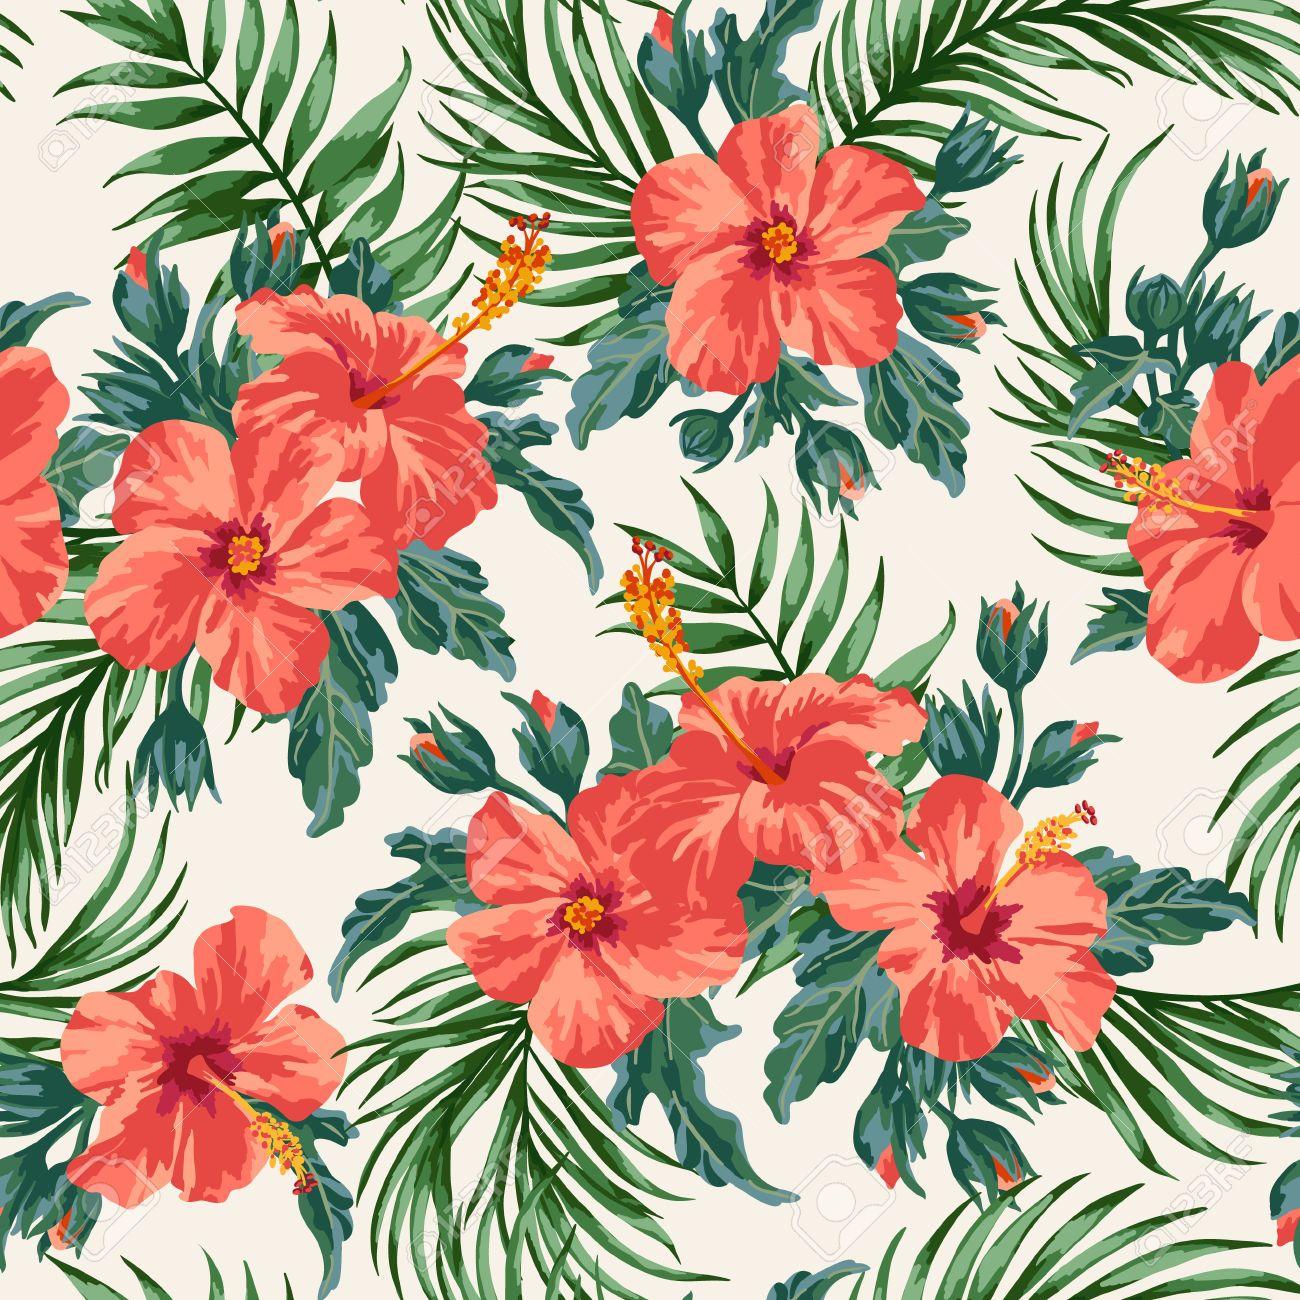 40210498 Seamless Exotic Pattern With Tropical Leaves And Flowers On